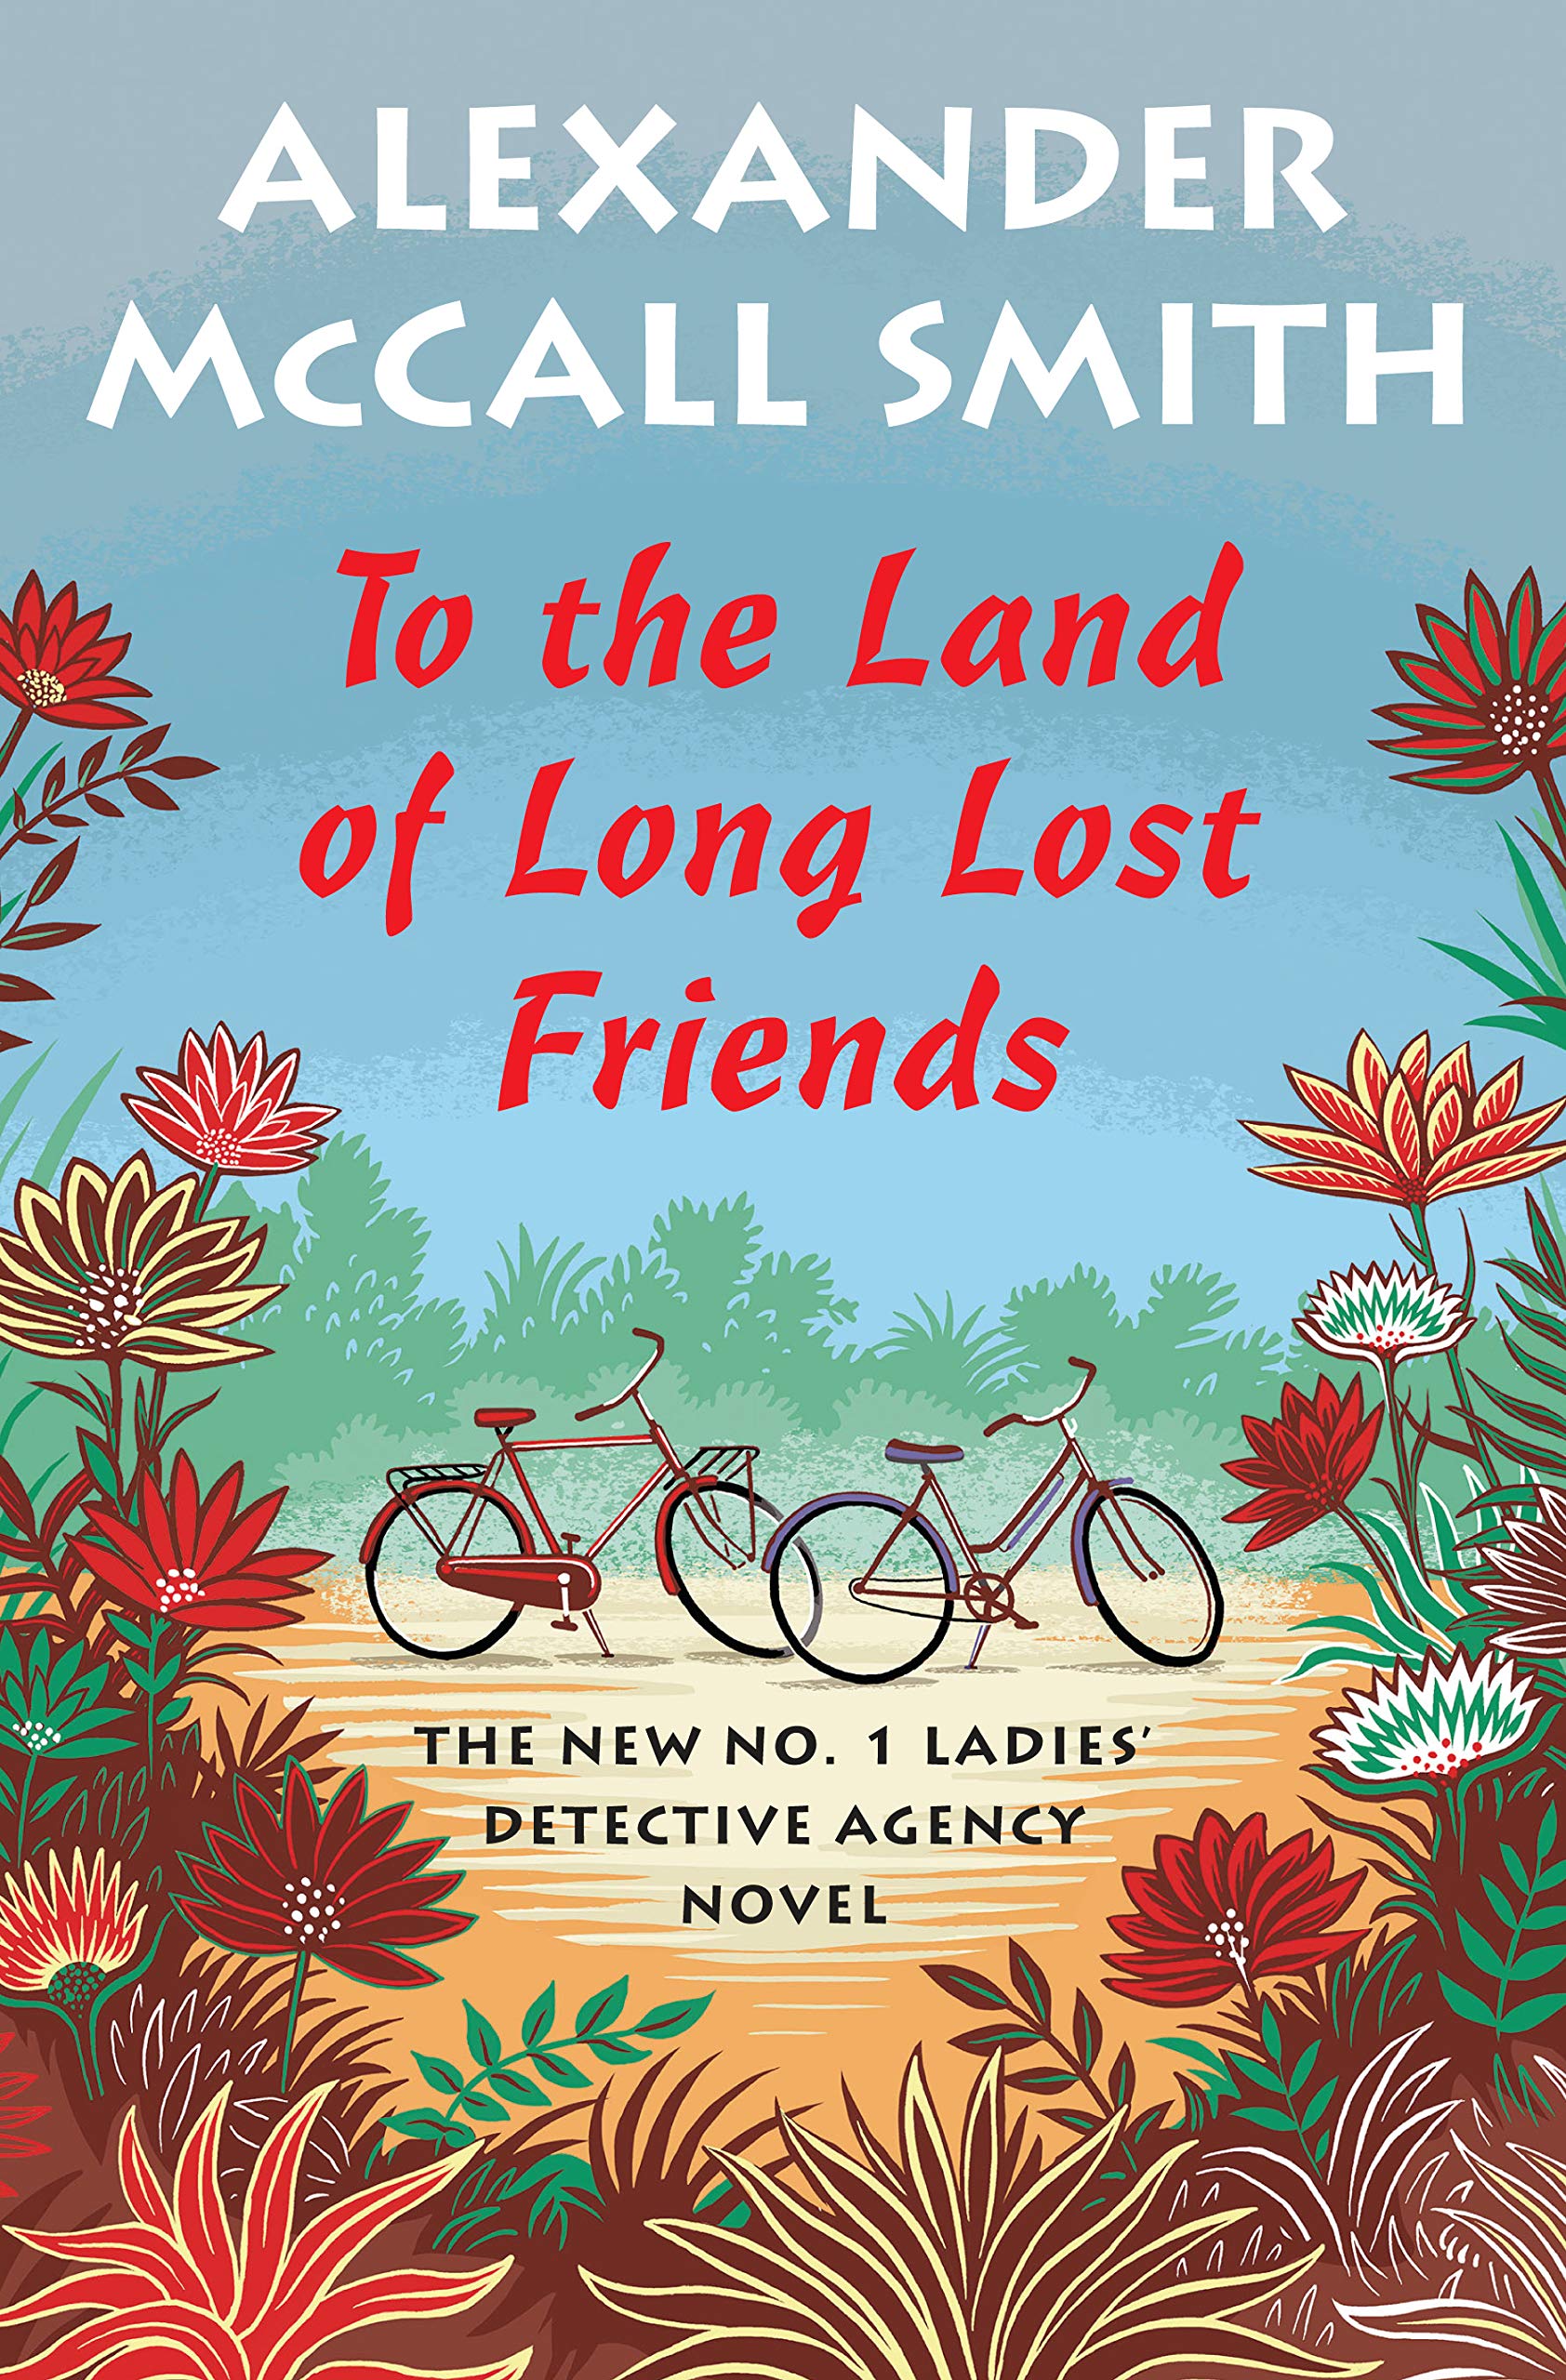 To the Land of Long Lost Friends (No. 1 Ladies' Detective Agency Series)